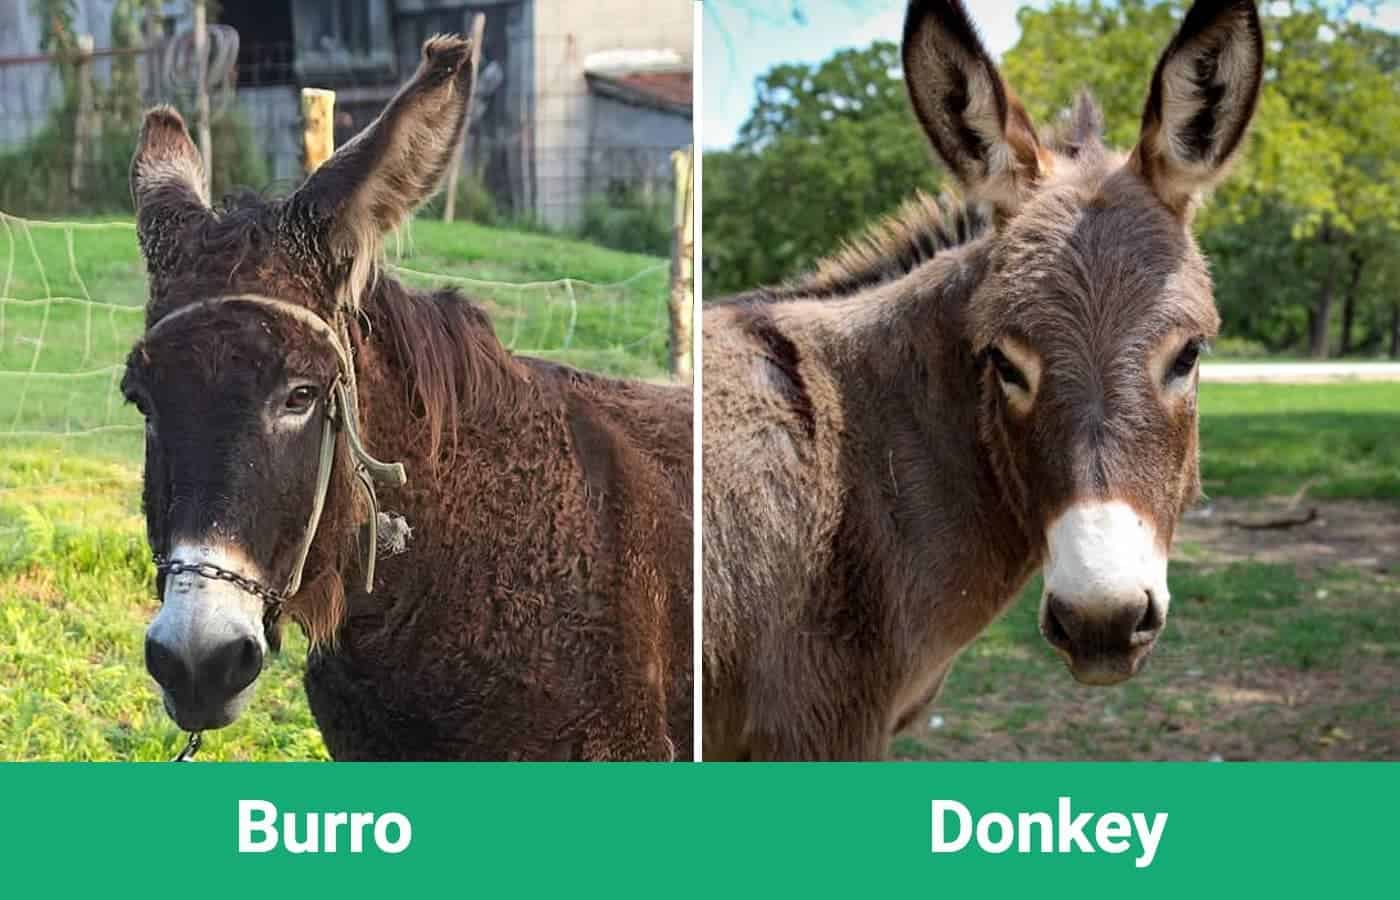 Burro and Donkey side by side